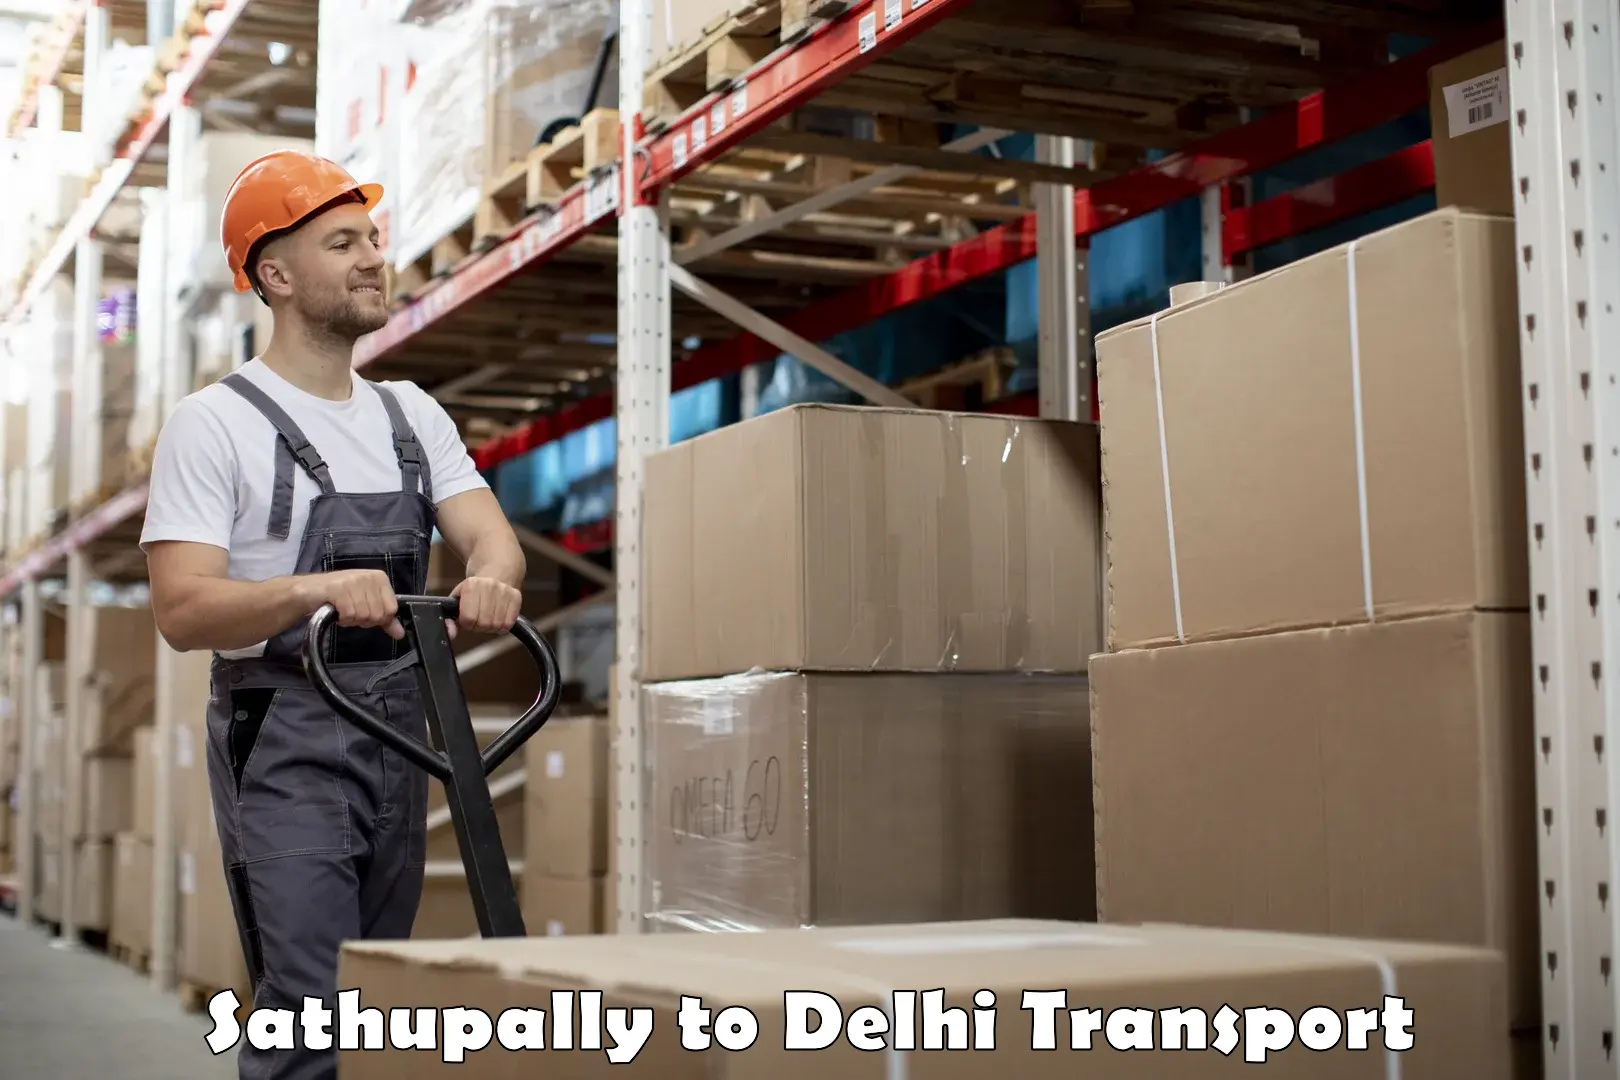 Online transport booking Sathupally to East Delhi